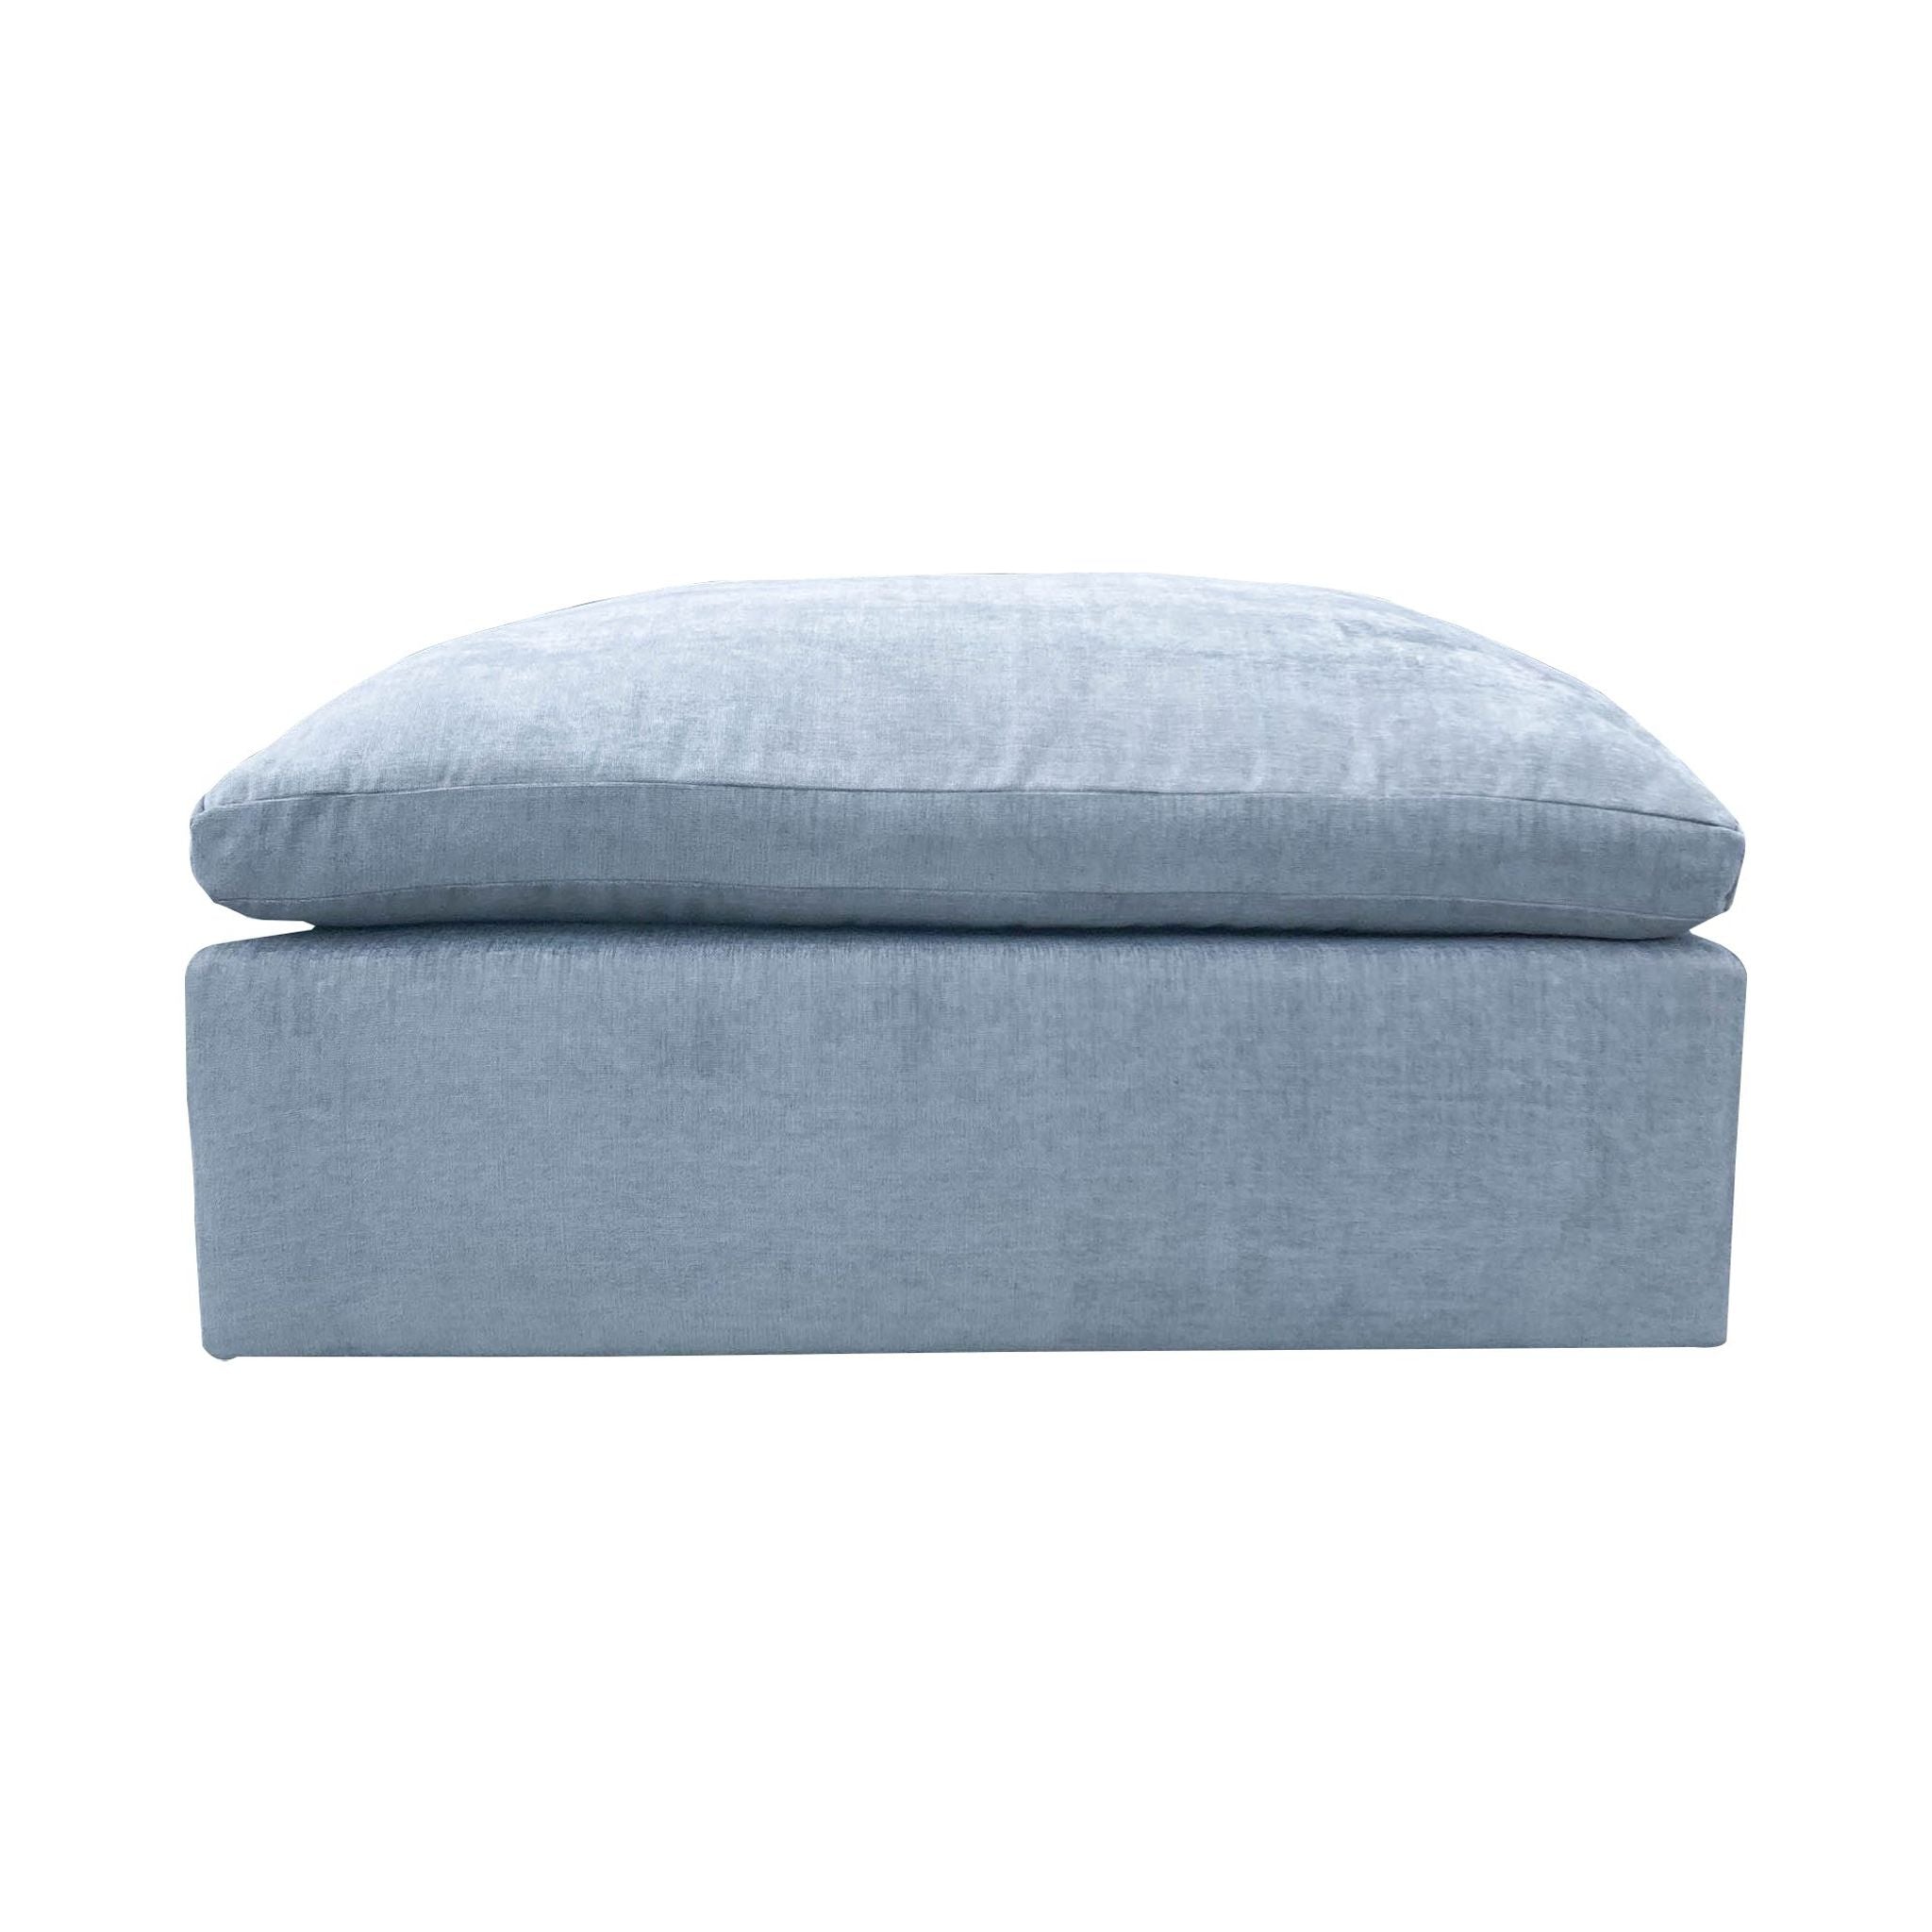 1. A West Elm modern grey velvet square ottoman, 44 inches, with clean lines suitable as a coffee table.